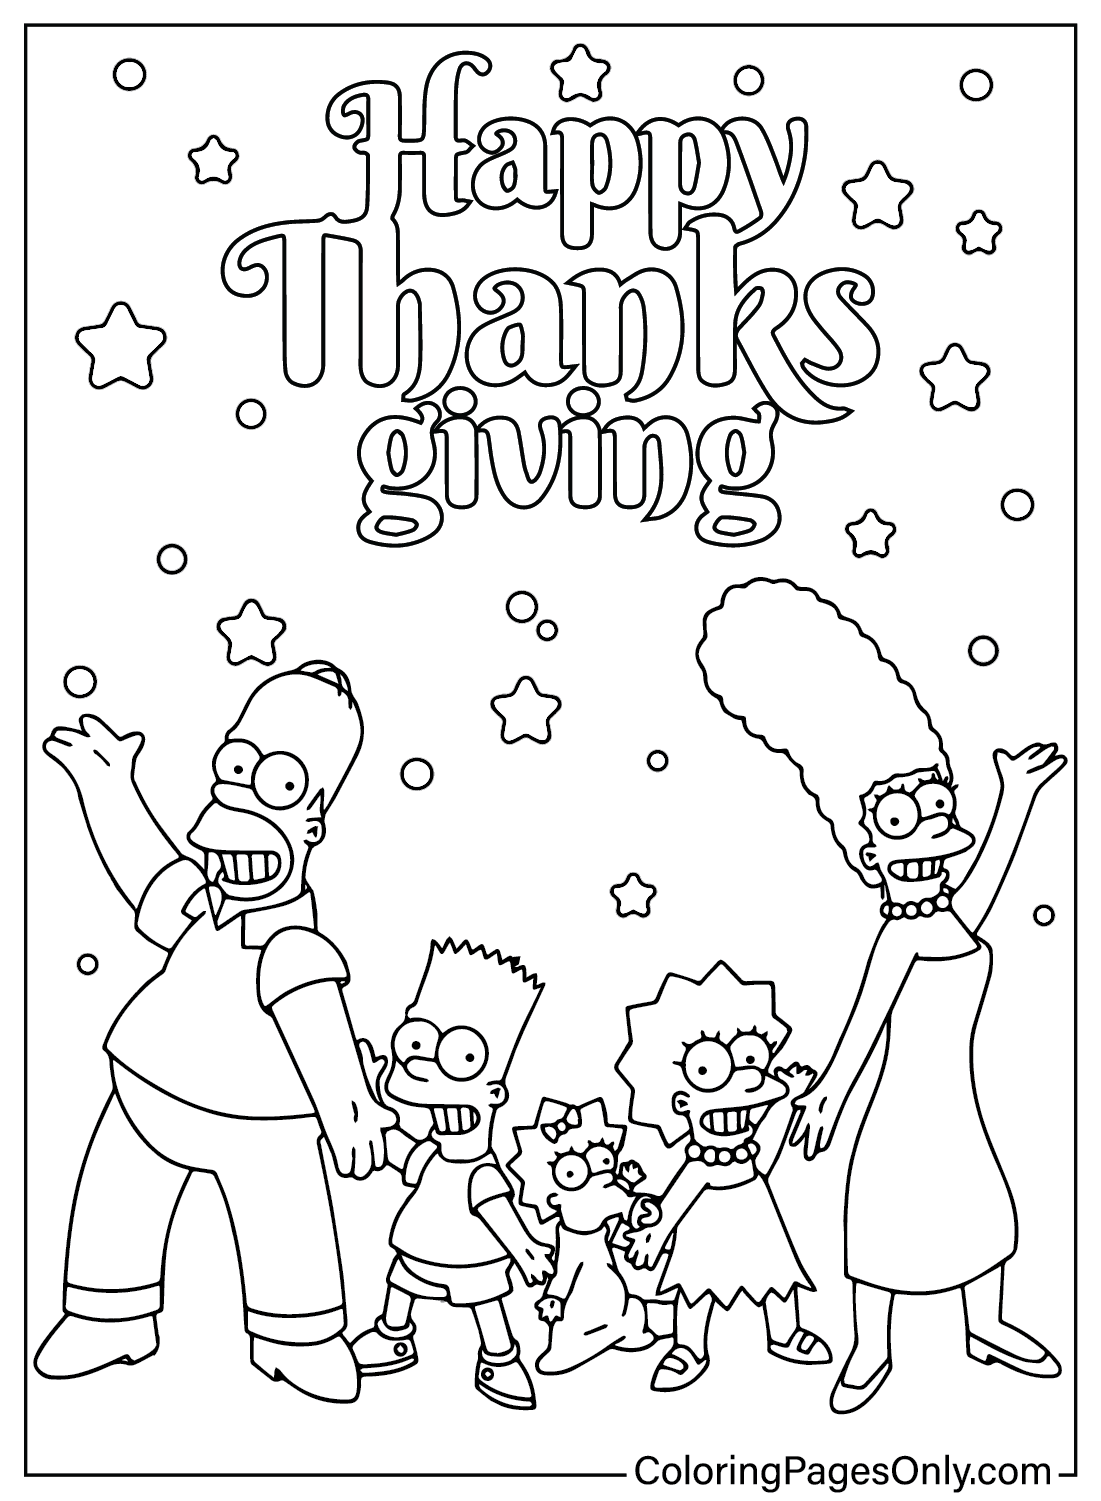 Thanksgiving Simpson Family Coloring Page